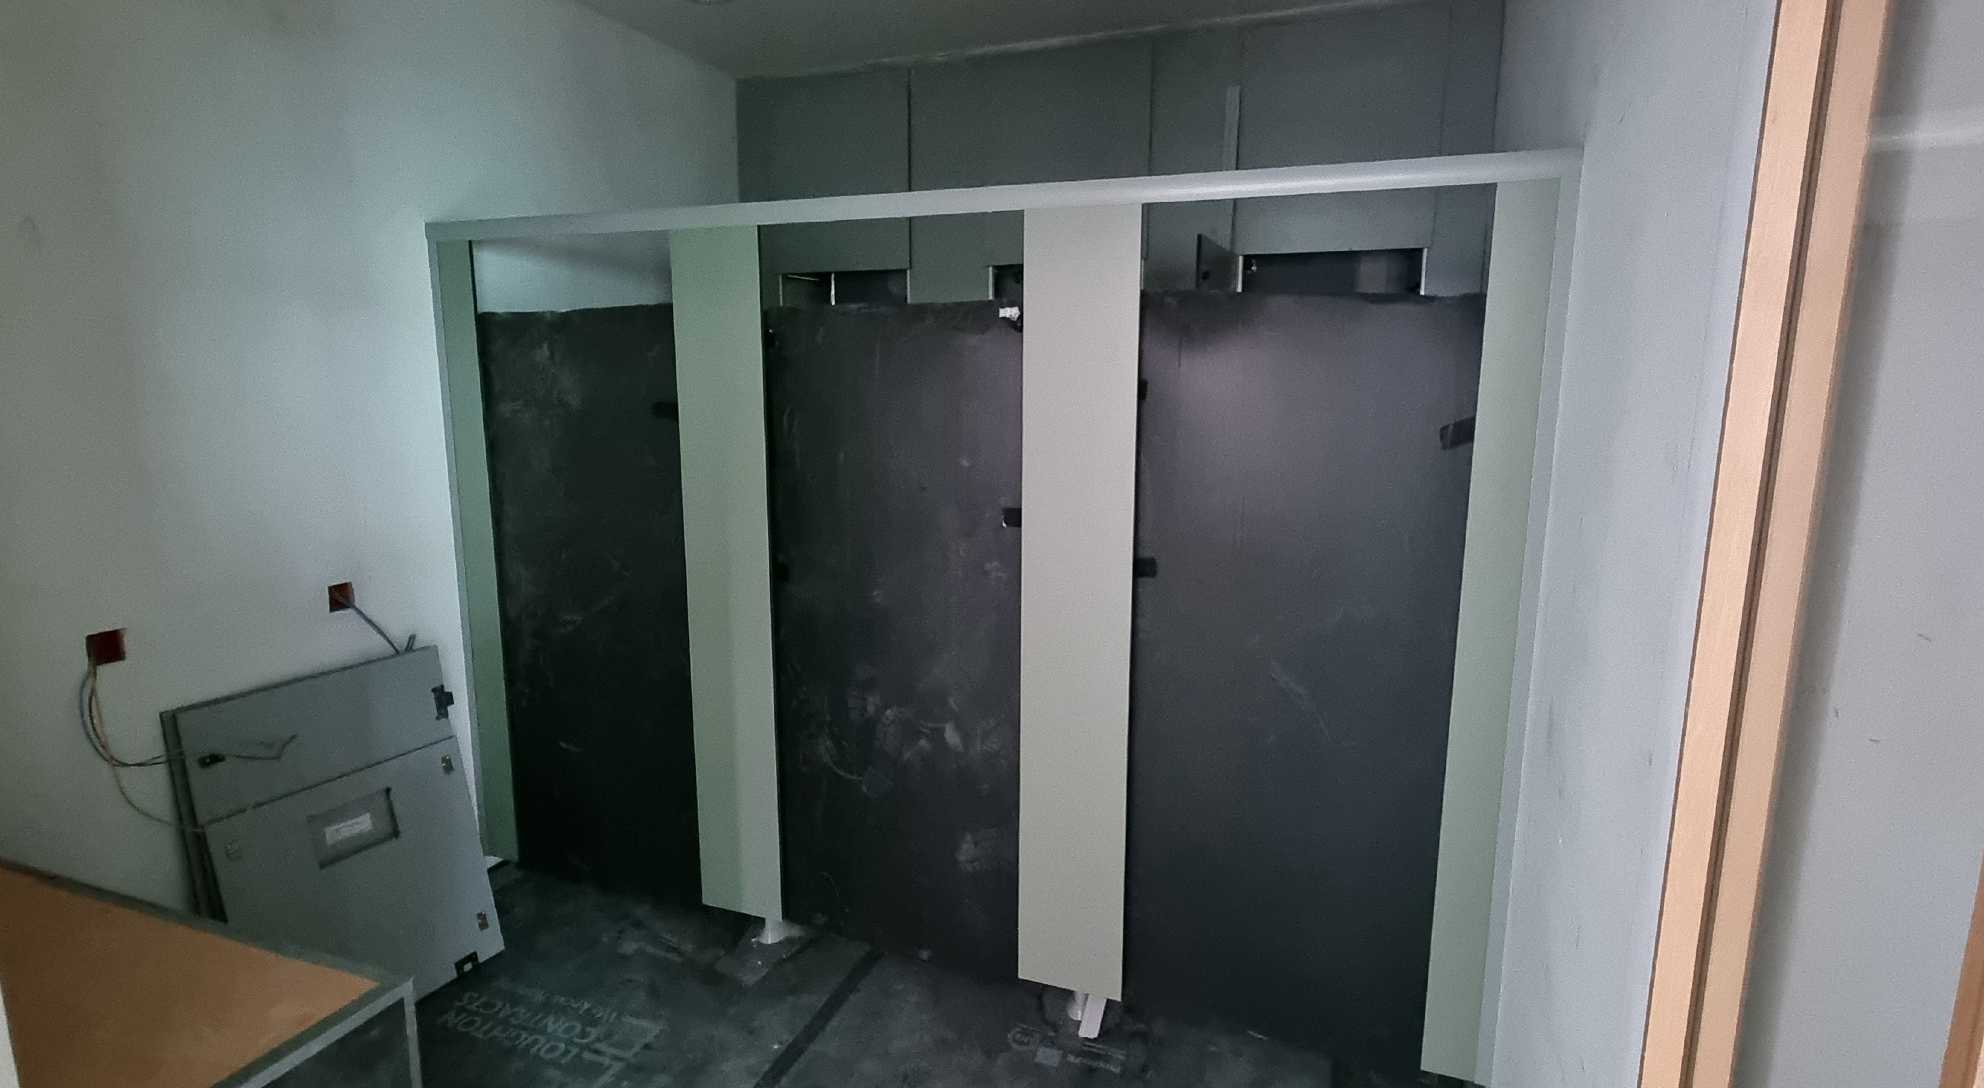 Main school building - Level two toilets